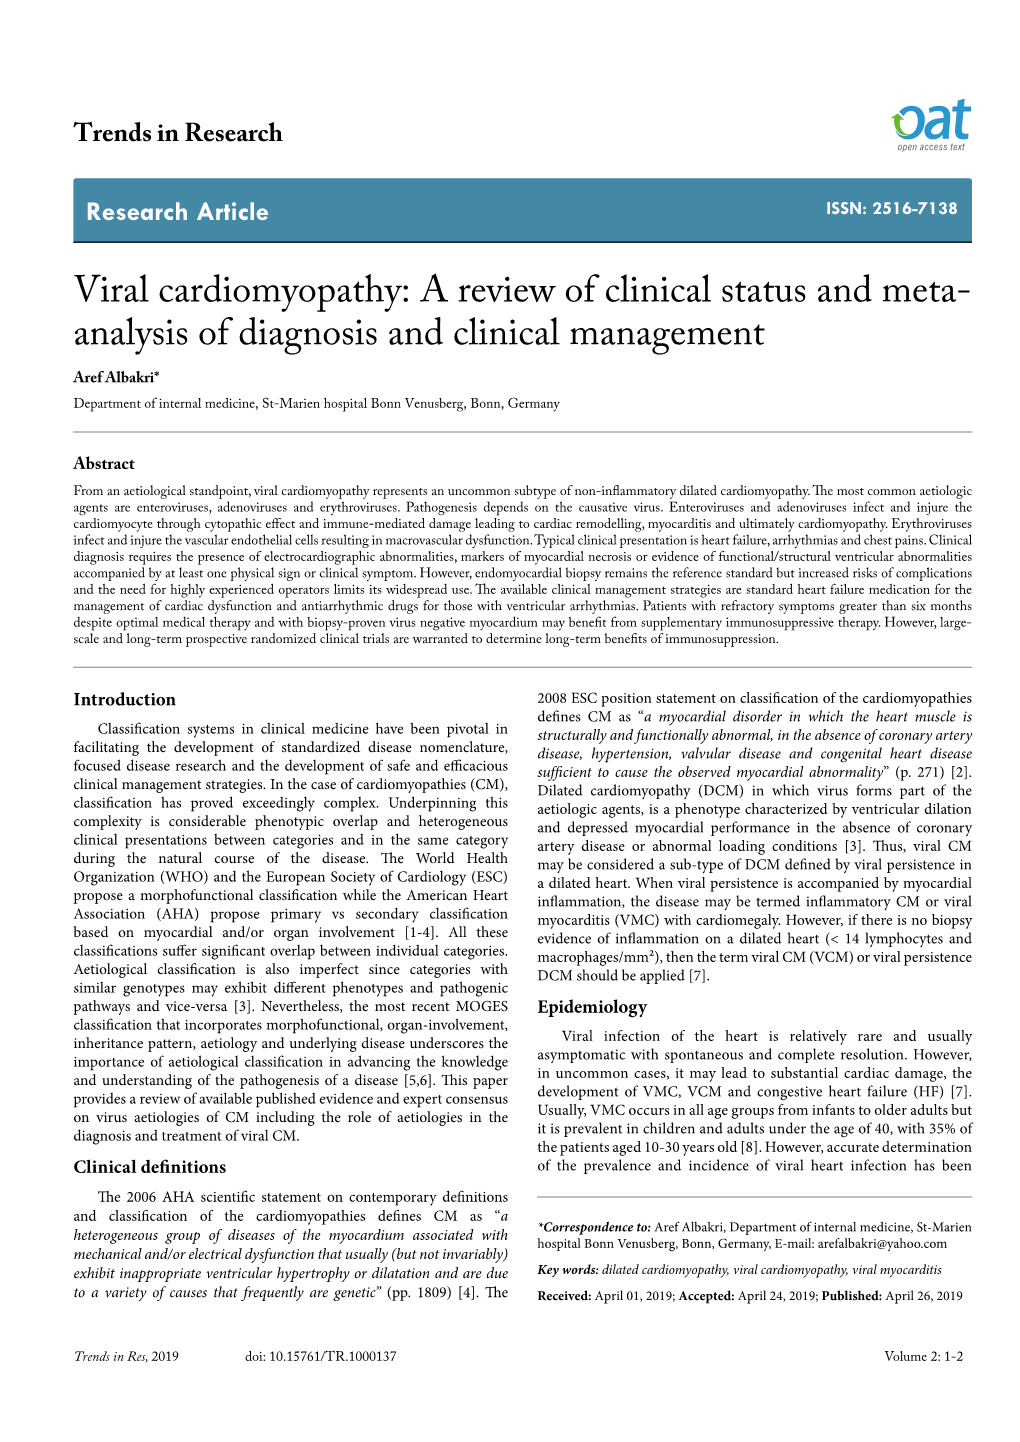 Viral Cardiomyopathy: a Review of Clinical Status and Meta